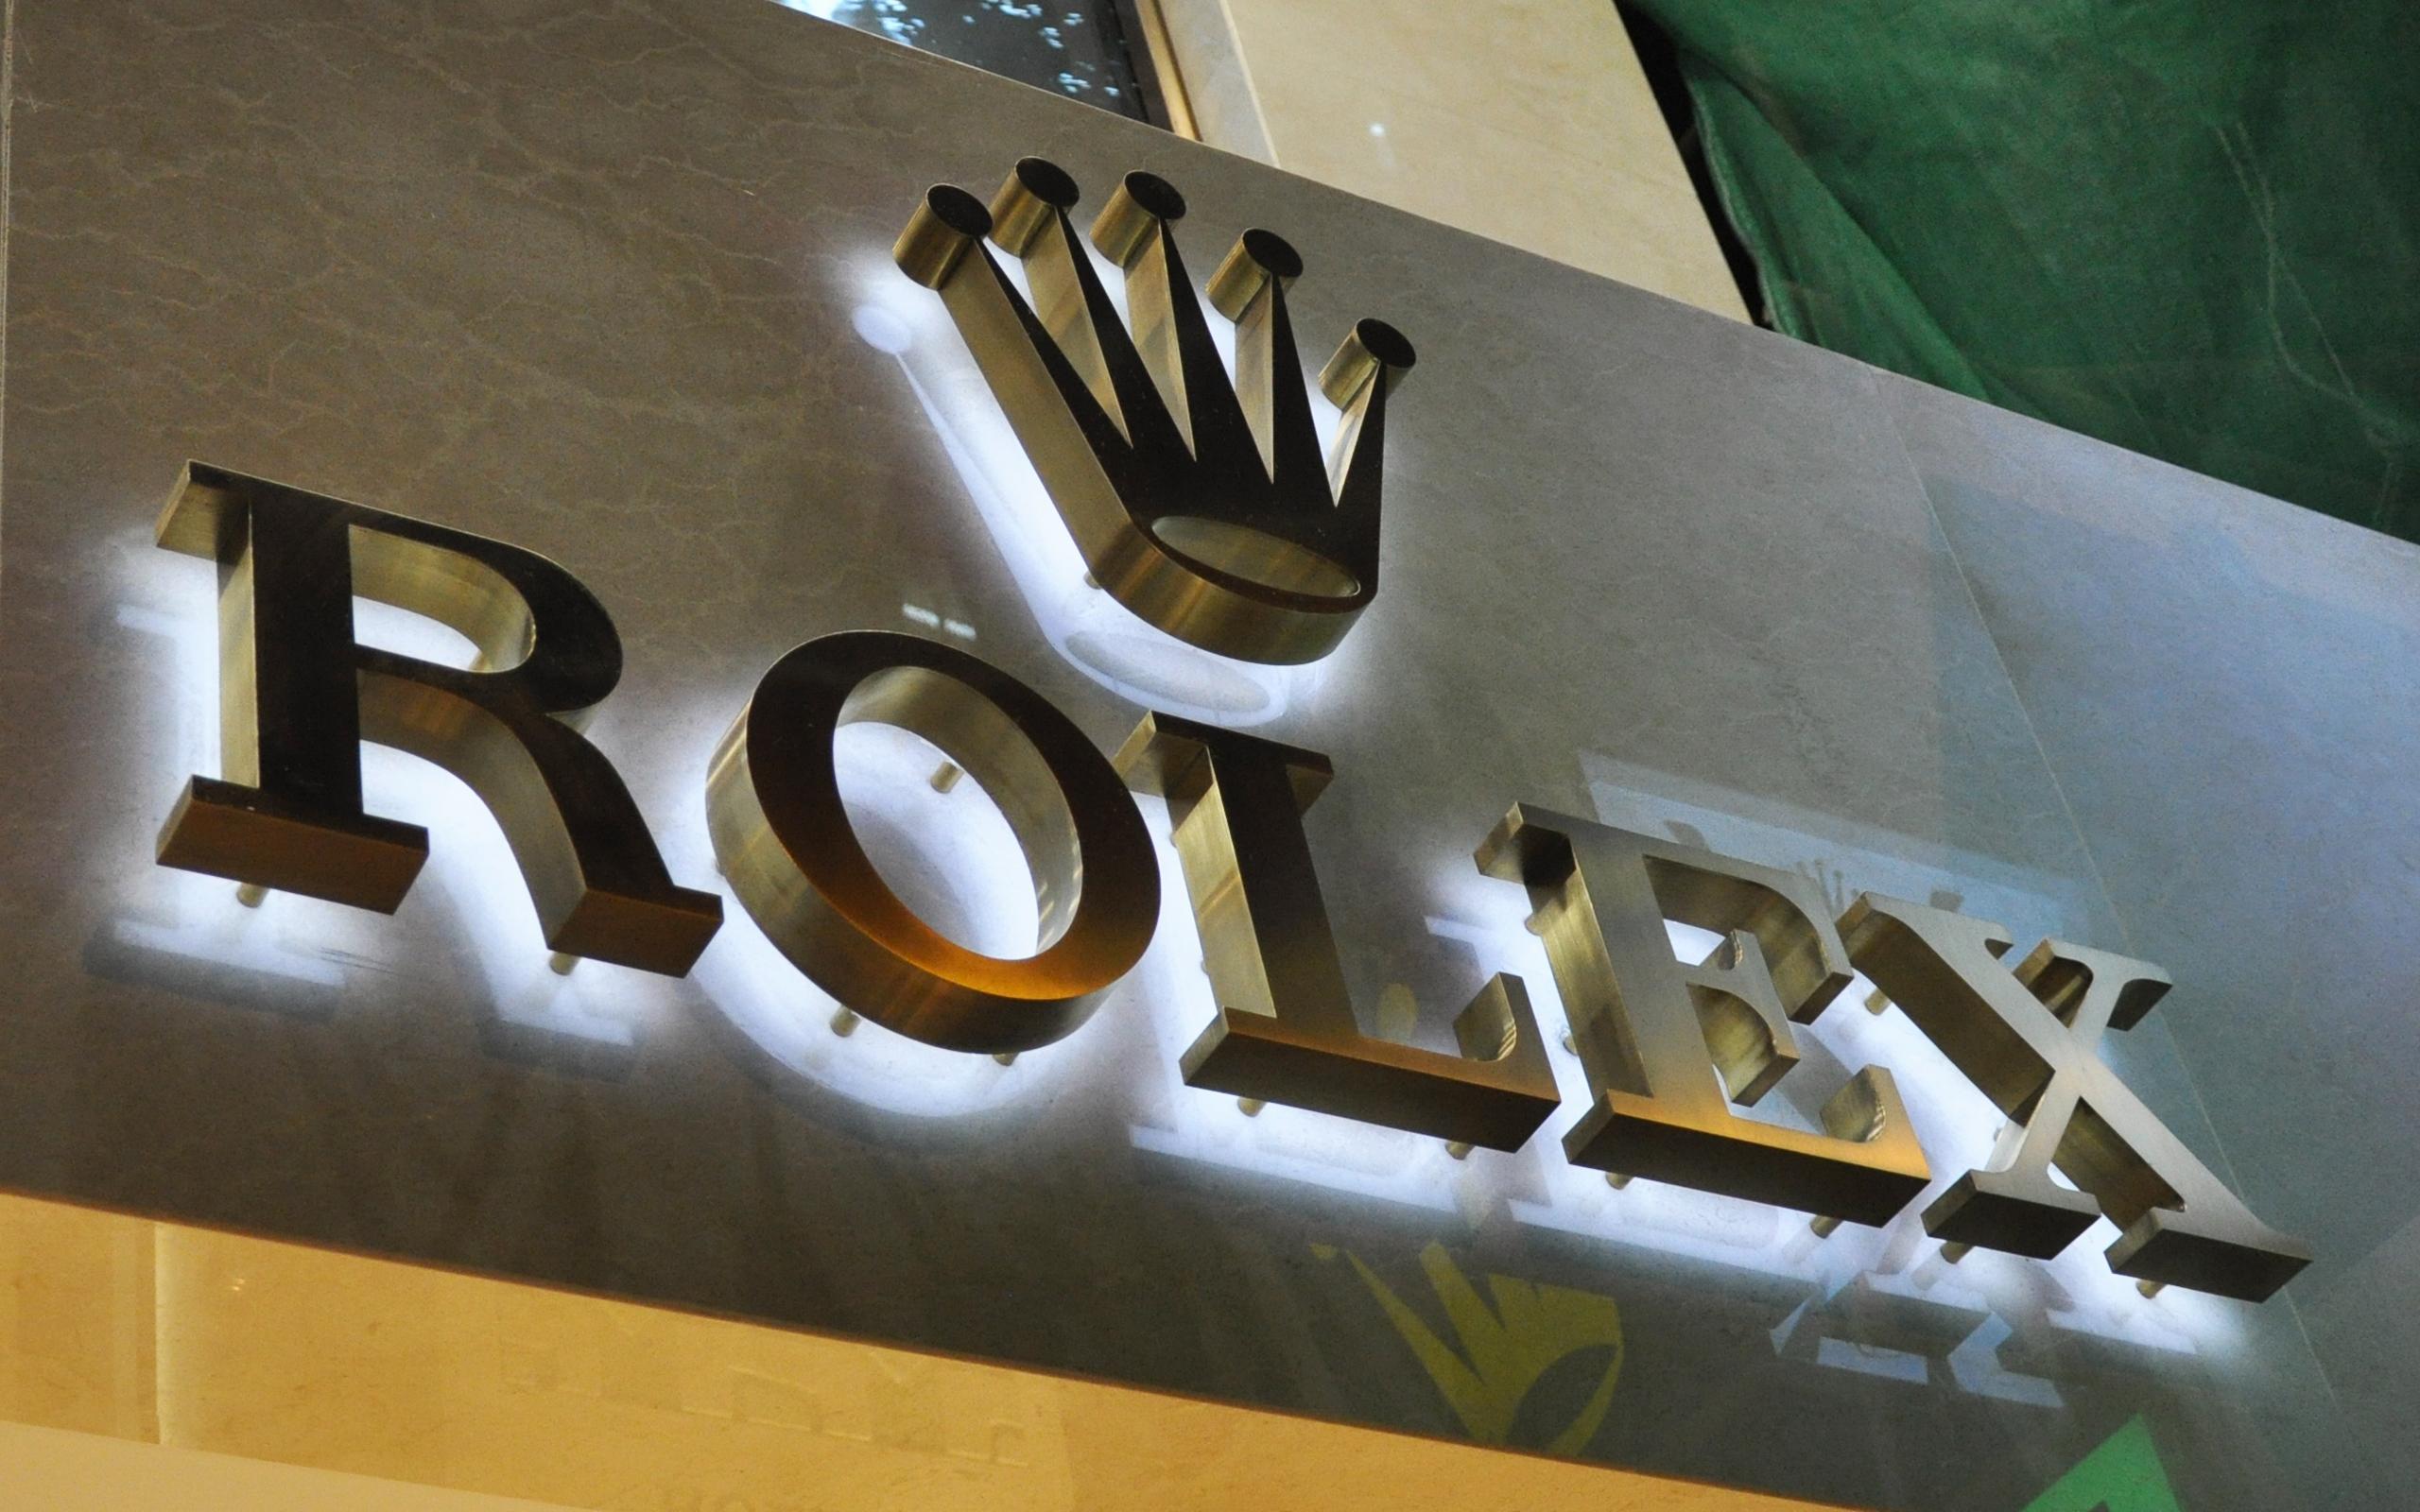 rolex-brass-fabricated-metal-signage-halo-glow-large